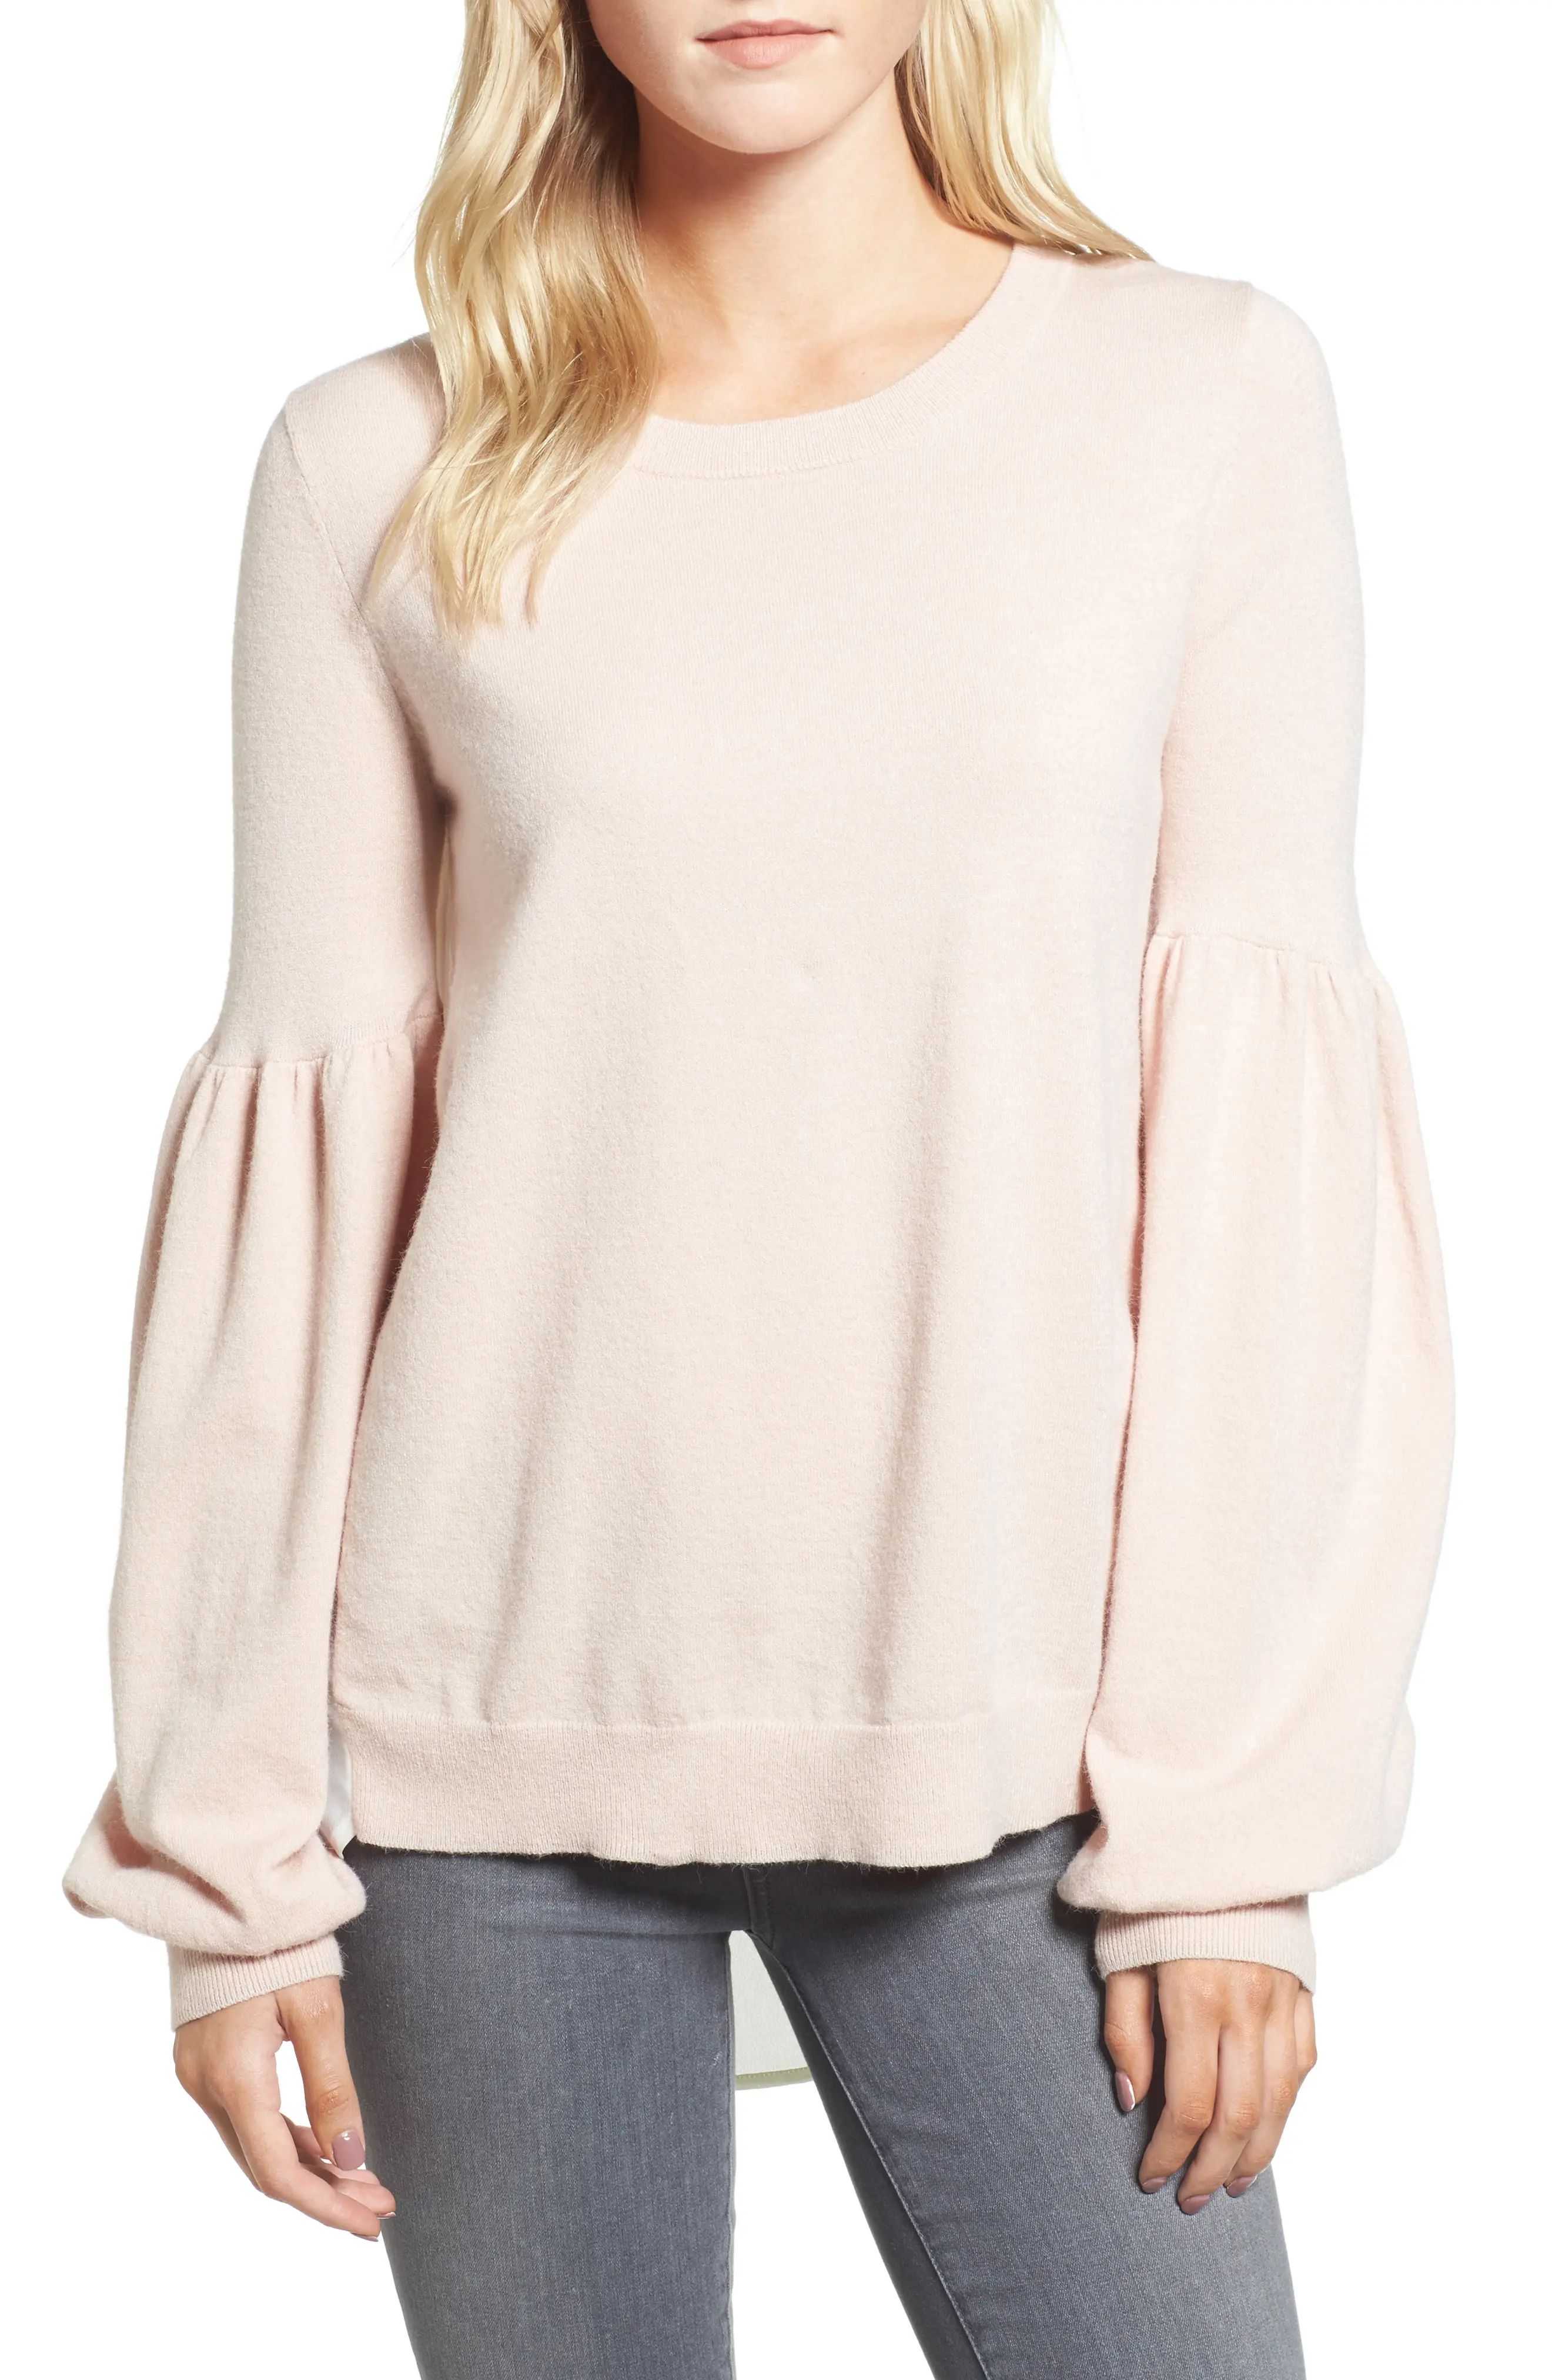 Woven Back Sweater | Nordstrom